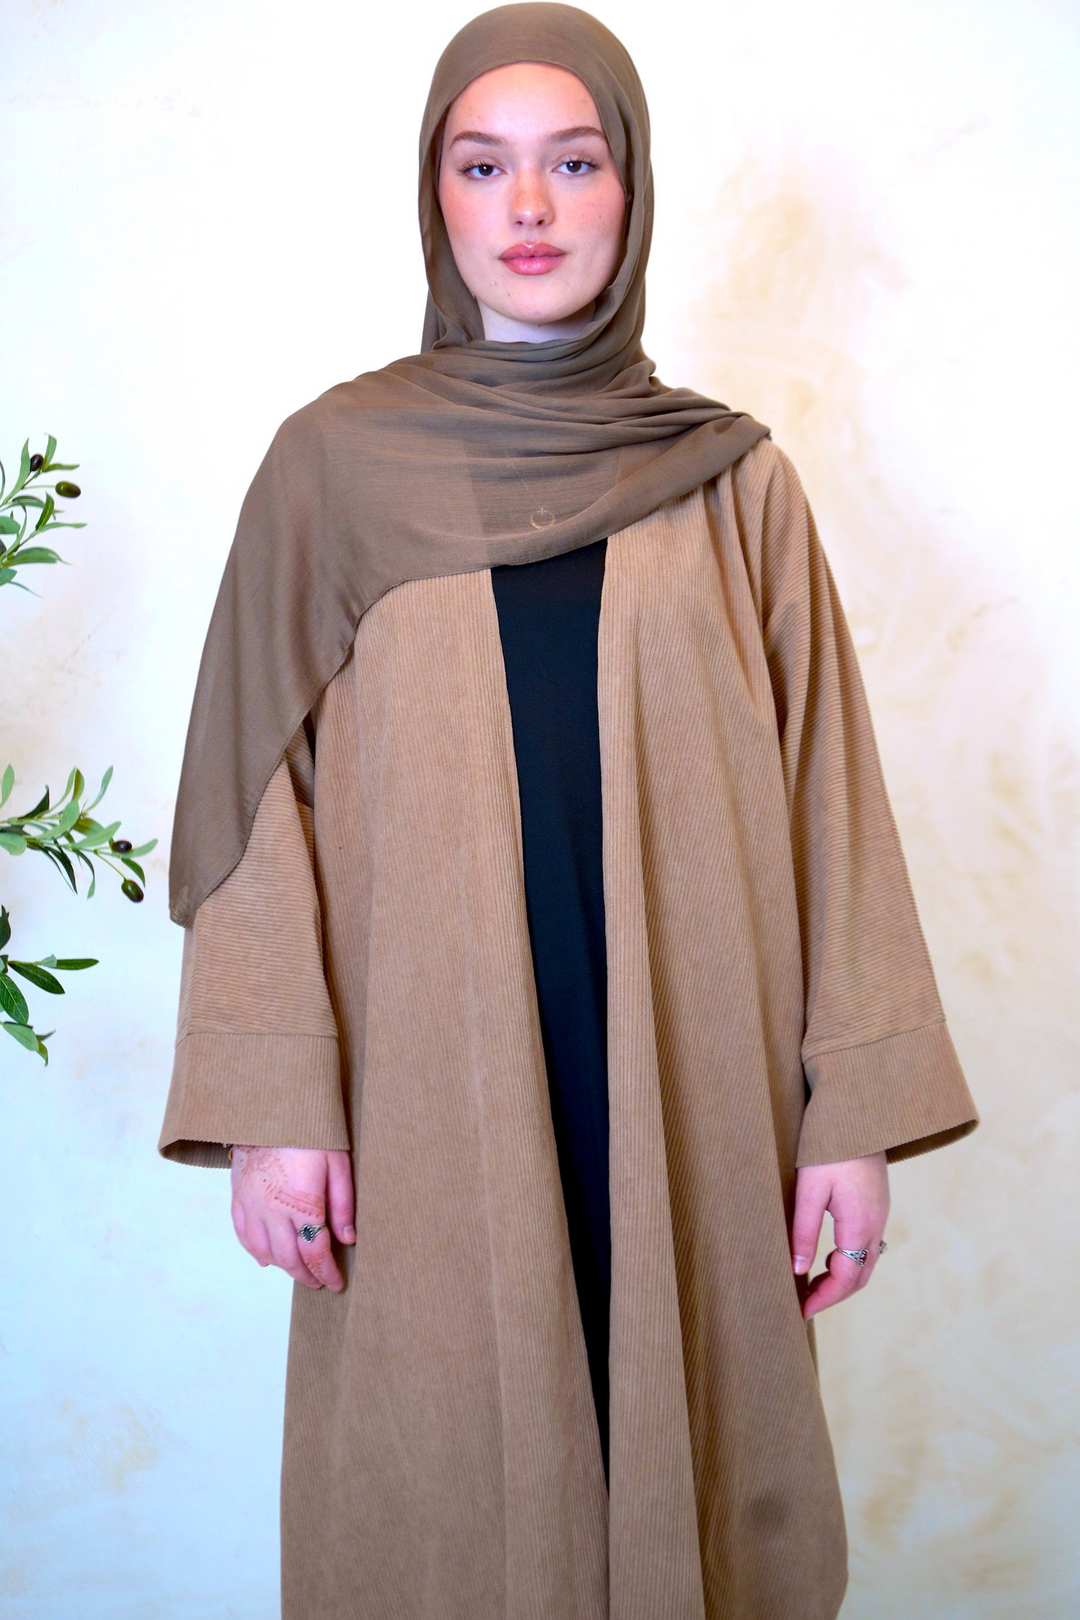 a woman wearing a brown shawl and black dress